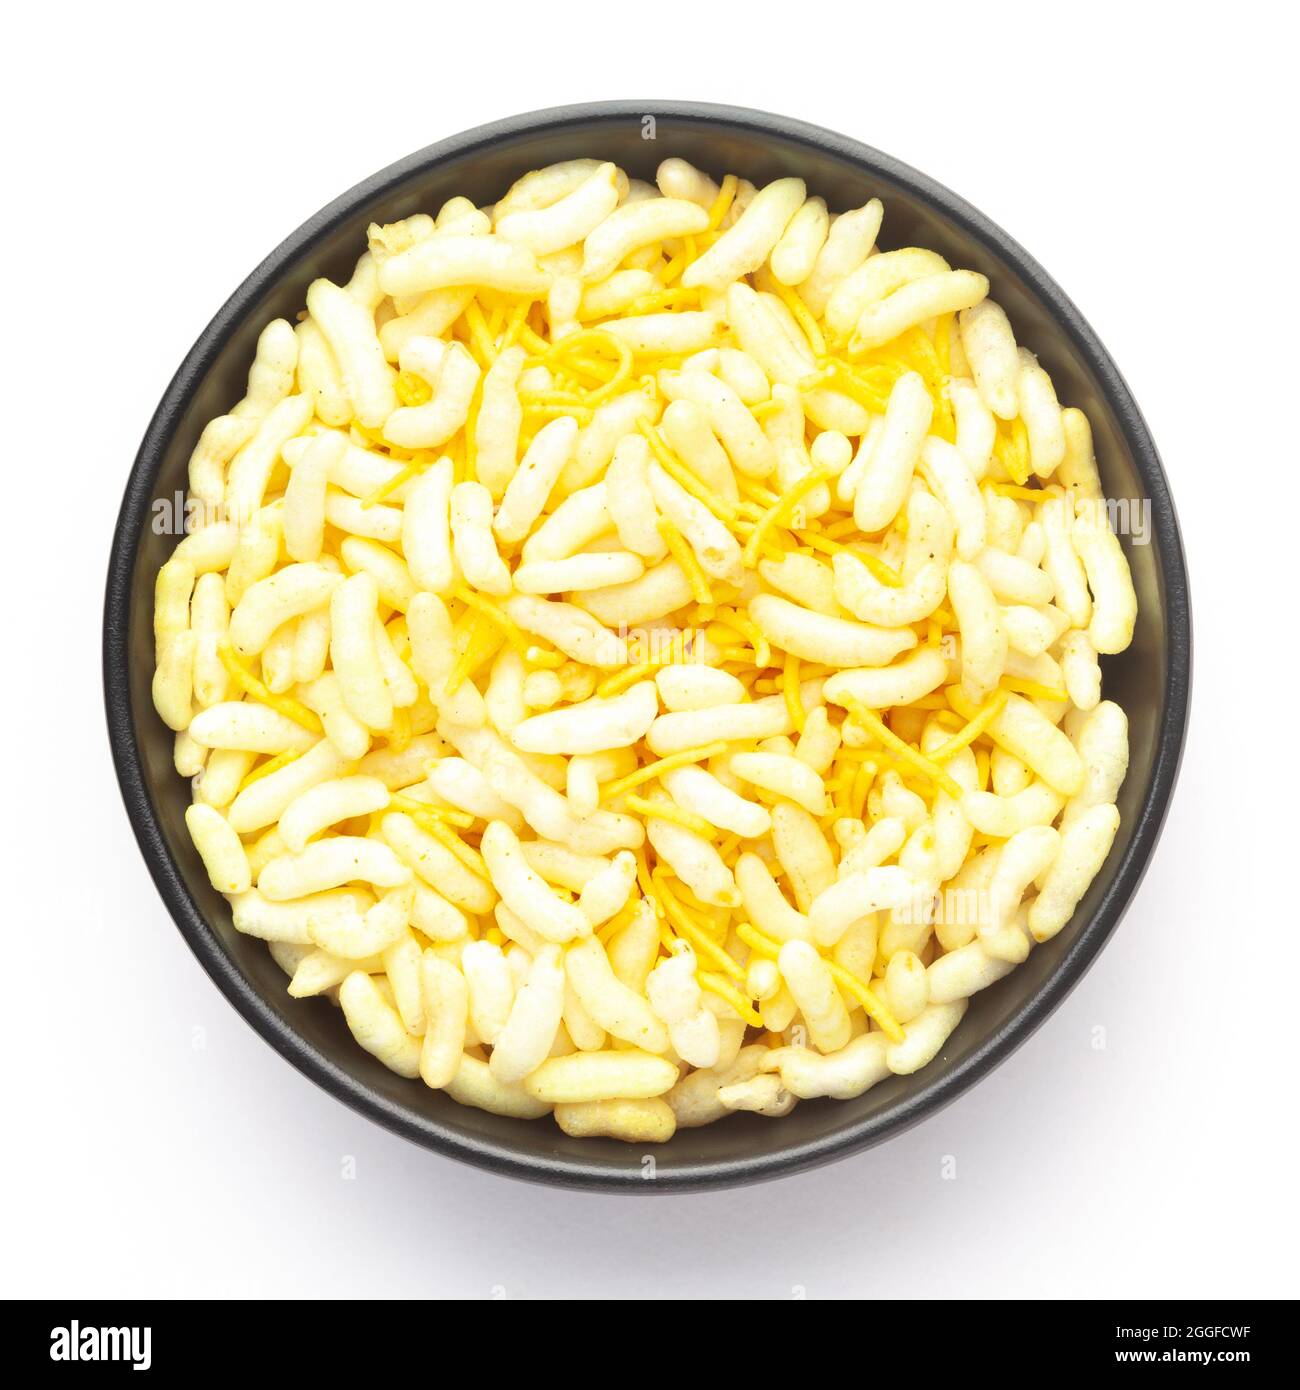 Close-Up of Crunchy Lemon Bhel in a black ceramic bowl made with Puffed Rice small besan sev. Indian spicy snacks (Namkeen), Top View Stock Photo